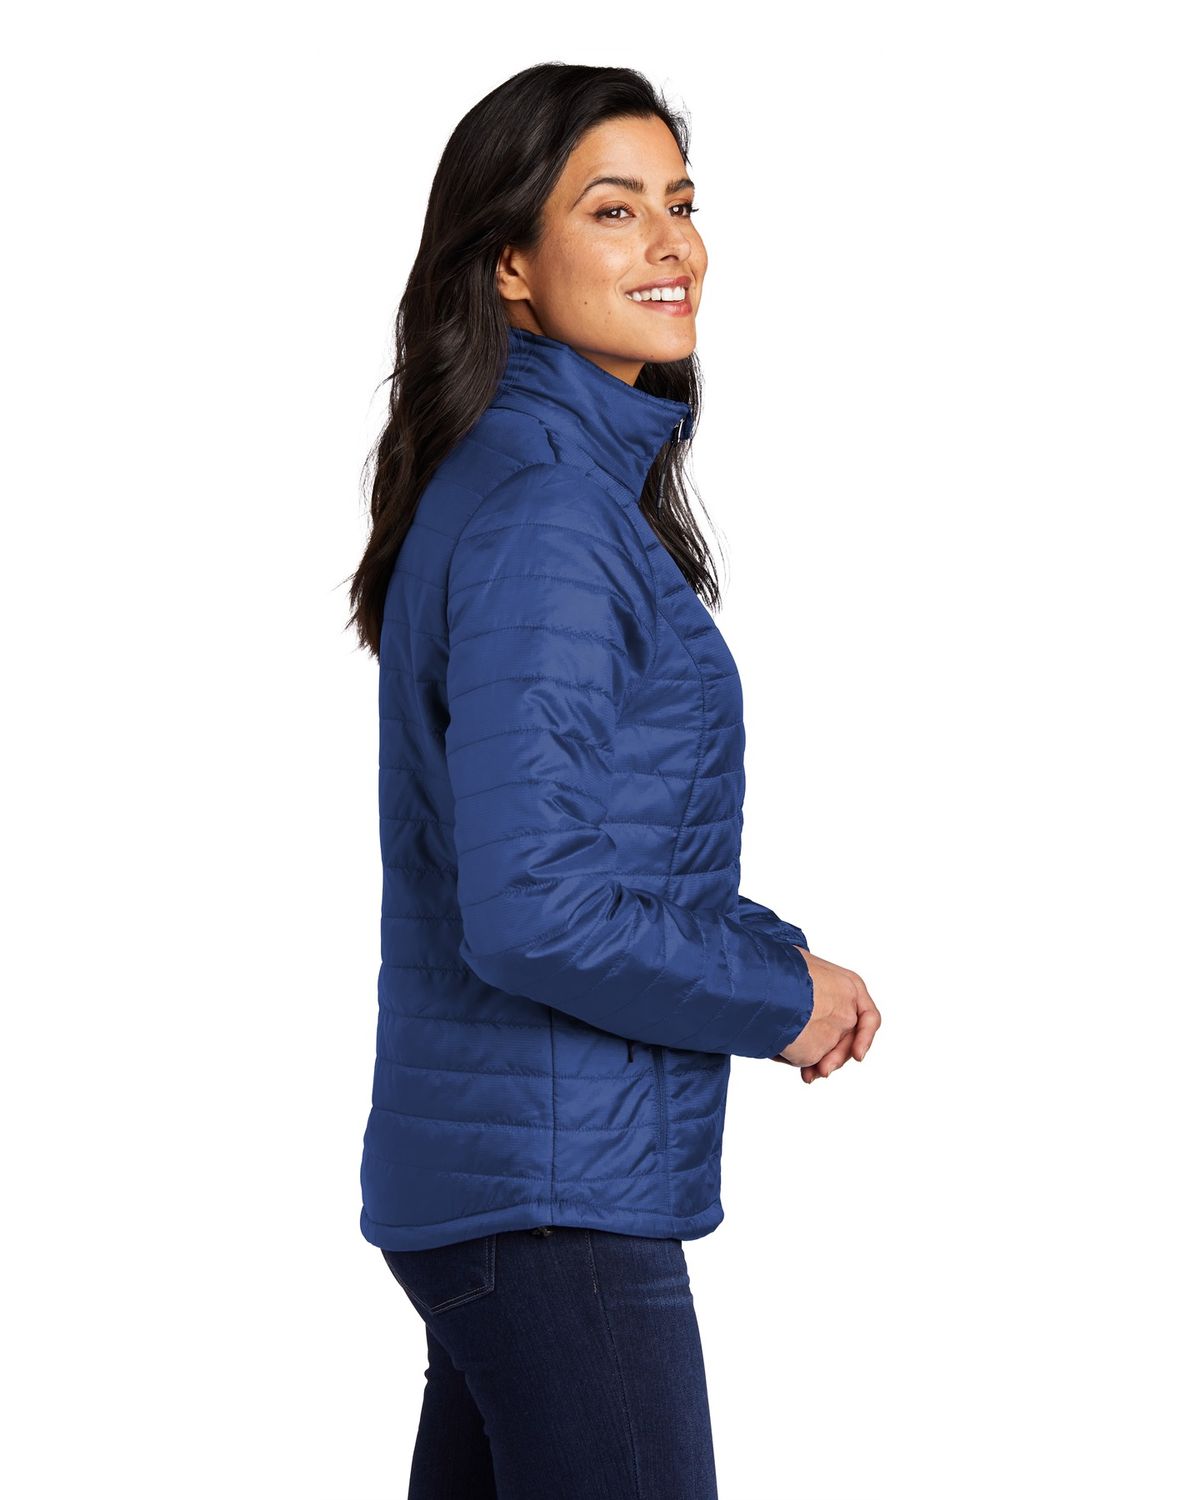 'Port Authority L850 Ladies Packable Puffy Jacket'